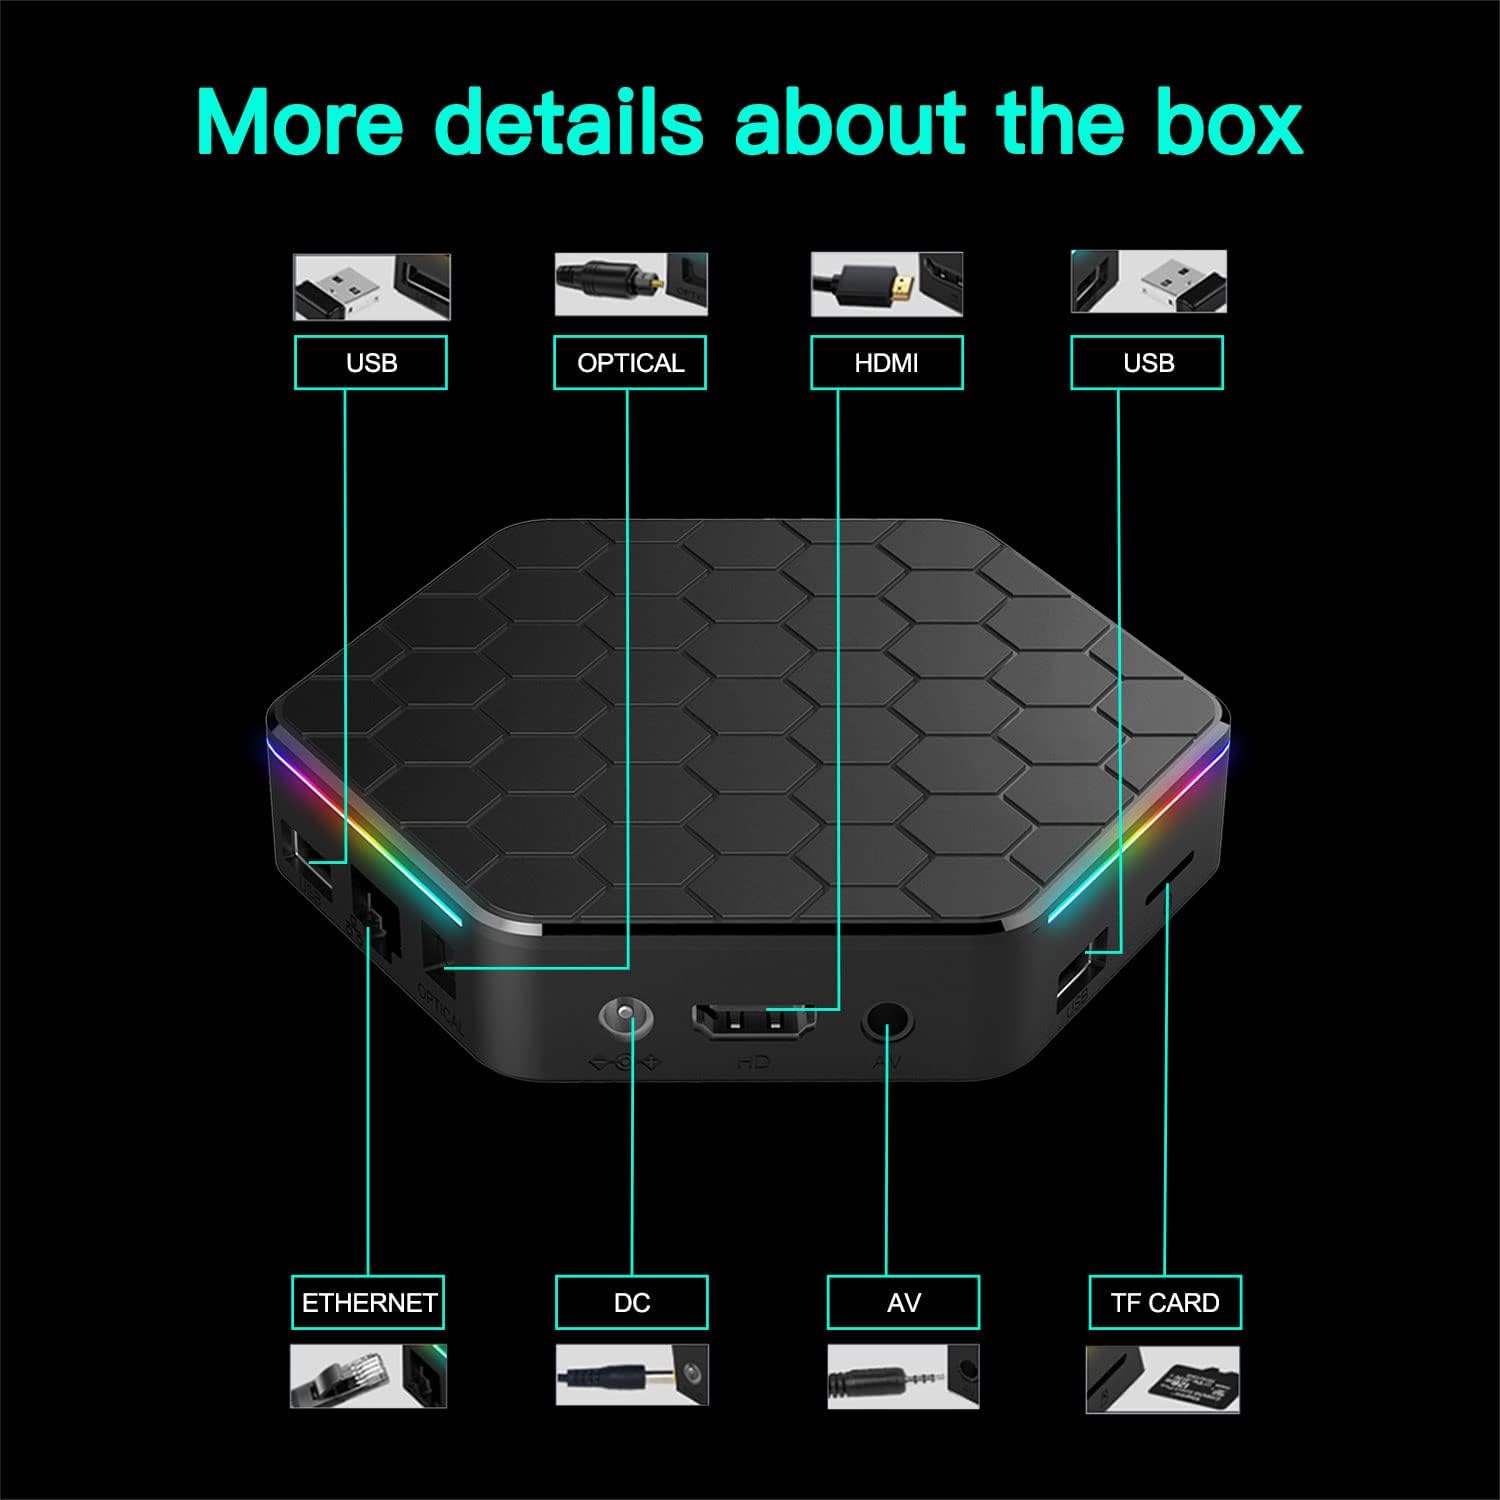 Android TV Box 12.0, Android Box 4GB RAM 32GB ROM H618 Quad Core Cortex-A53 CPU Support WiFi 6 5GHz + 2.4GHz Dual WiFi Bluetooth 5.0 LAN 100M Ethernet 3D 6K UHD/H.265 Smart Box